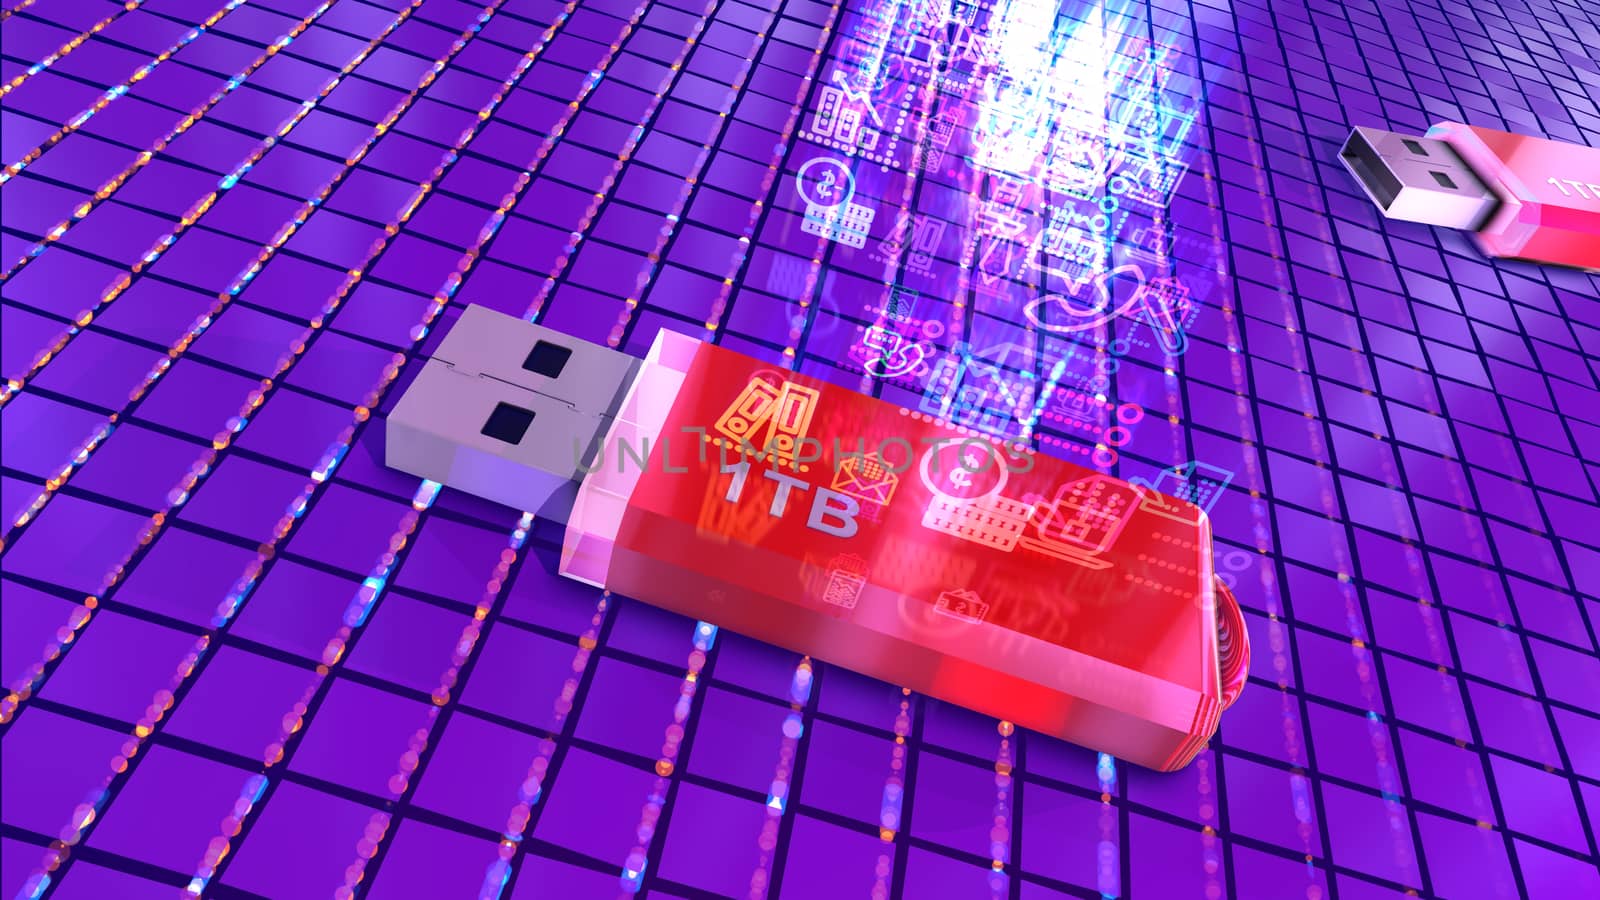 Breakthrough 3d illustration of two red flash drives lying on a cyber platform put askew and covered with a grid of conductors with streams of information.